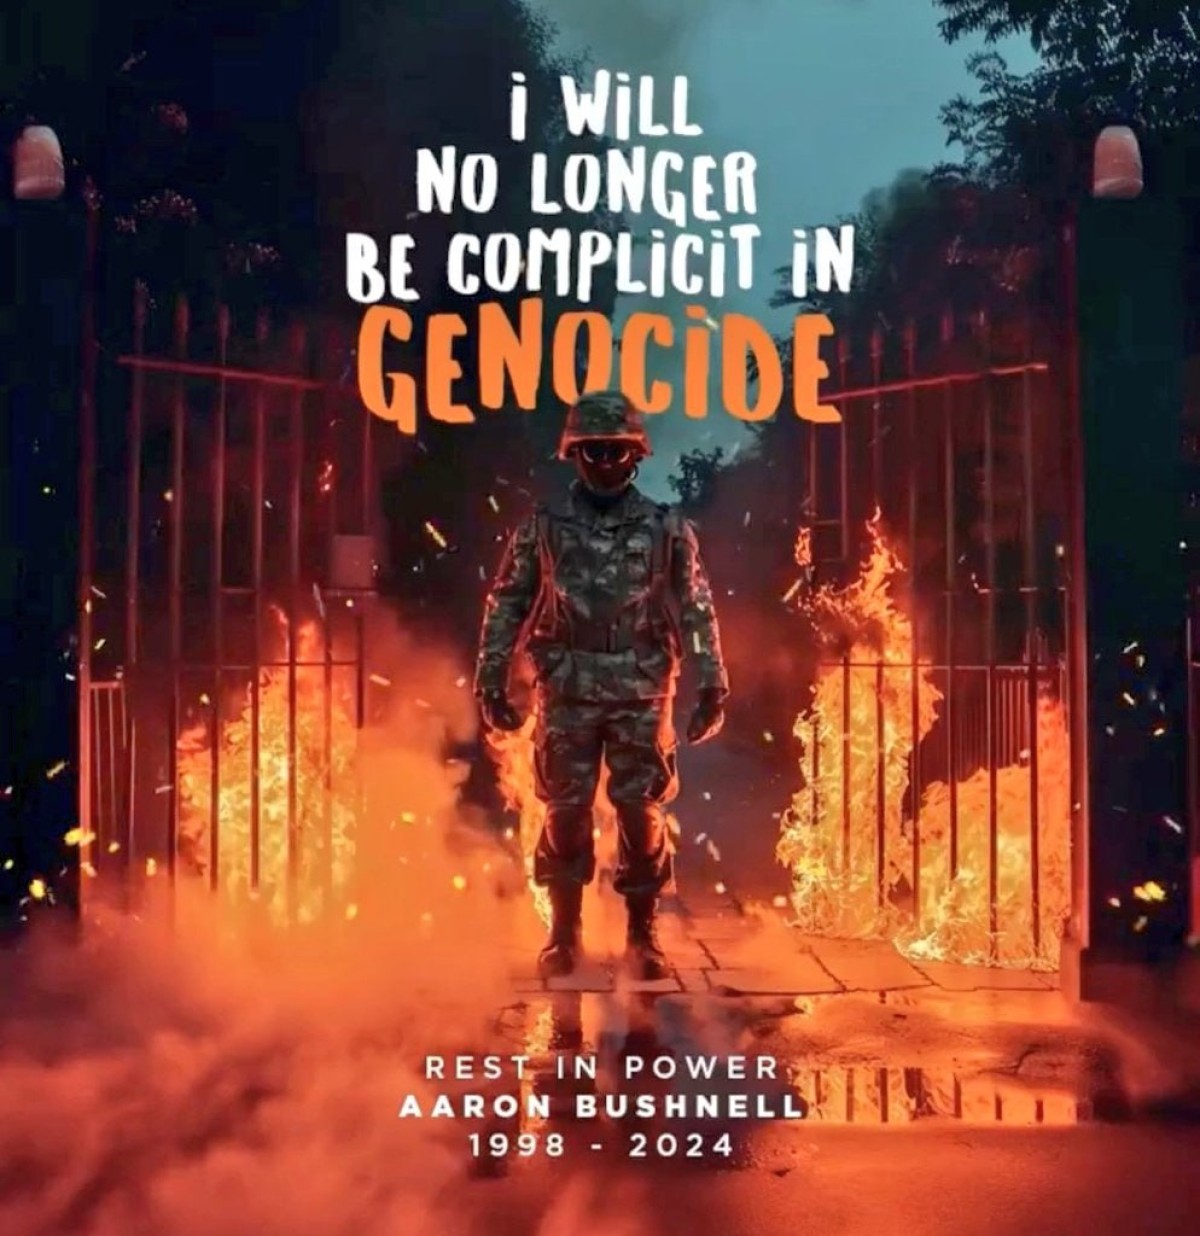 I WILL NO LONGER BE COMPLICIT IN GENOCIDE